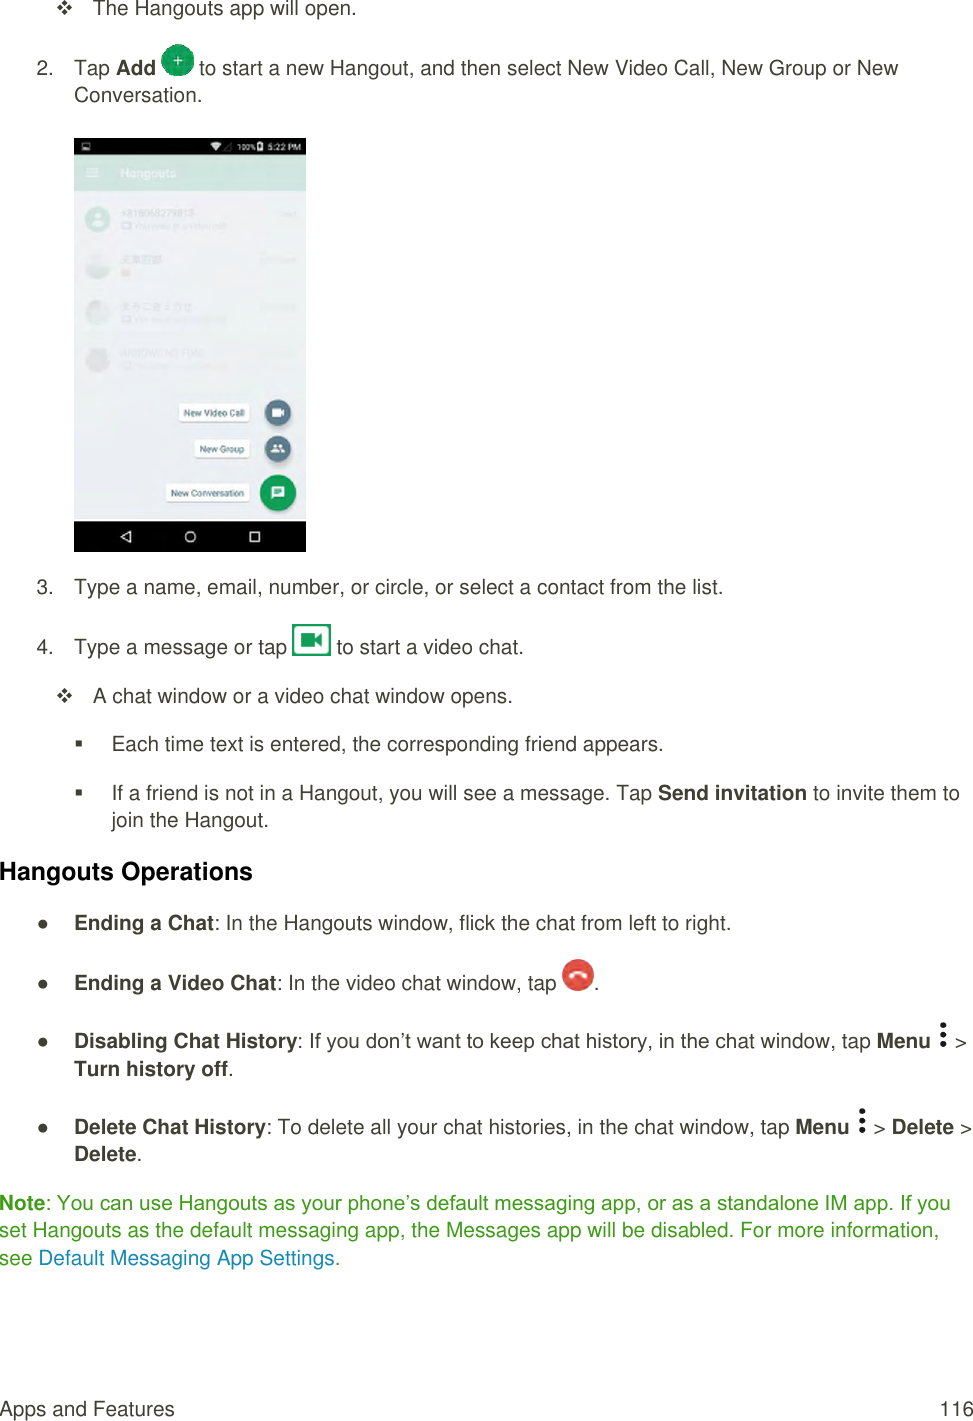 Apps and Features  116   The Hangouts app will open. 2.  Tap Add   to start a new Hangout, and then select New Video Call, New Group or New Conversation.   3.  Type a name, email, number, or circle, or select a contact from the list.  4.  Type a message or tap   to start a video chat.    A chat window or a video chat window opens.   Each time text is entered, the corresponding friend appears.   If a friend is not in a Hangout, you will see a message. Tap Send invitation to invite them to join the Hangout. Hangouts Operations ● Ending a Chat: In the Hangouts window, flick the chat from left to right. ● Ending a Video Chat: In the video chat window, tap  . ● Disabling Chat History: If you don’t want to keep chat history, in the chat window, tap Menu   &gt; Turn history off. ● Delete Chat History: To delete all your chat histories, in the chat window, tap Menu   &gt; Delete &gt; Delete. Note: You can use Hangouts as your phone’s default messaging app, or as a standalone IM app. If you set Hangouts as the default messaging app, the Messages app will be disabled. For more information, see Default Messaging App Settings. 